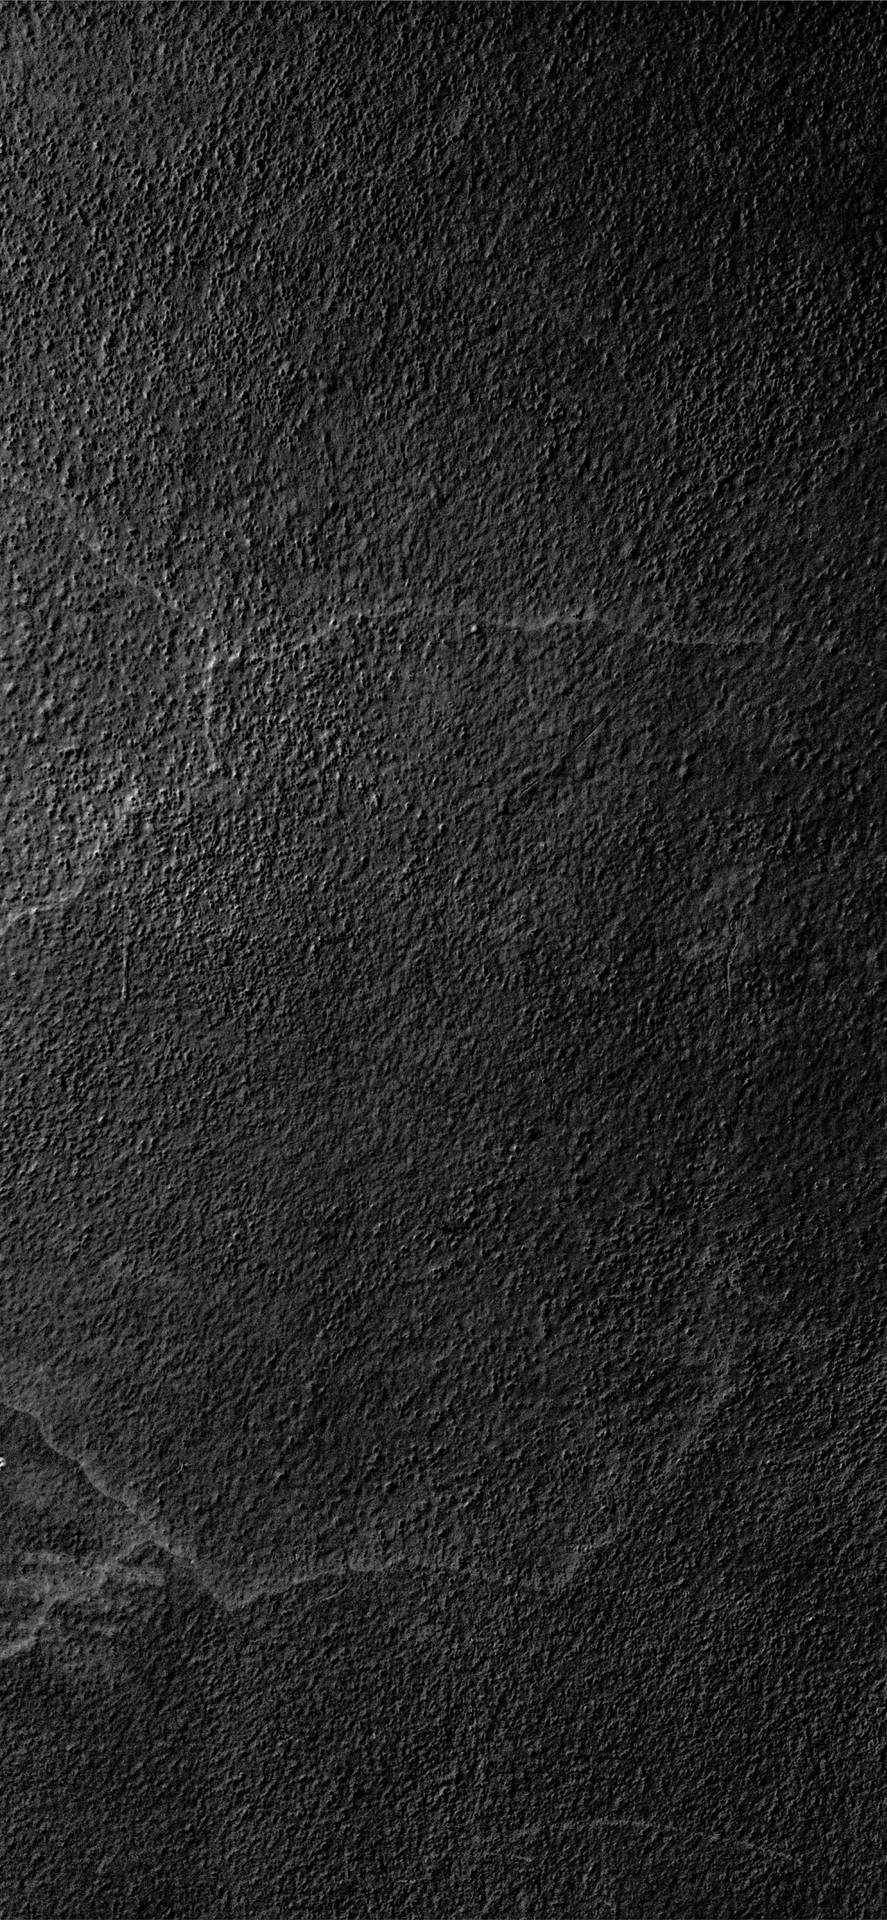 Dark Gray Background With Cracked Texture Wallpaper